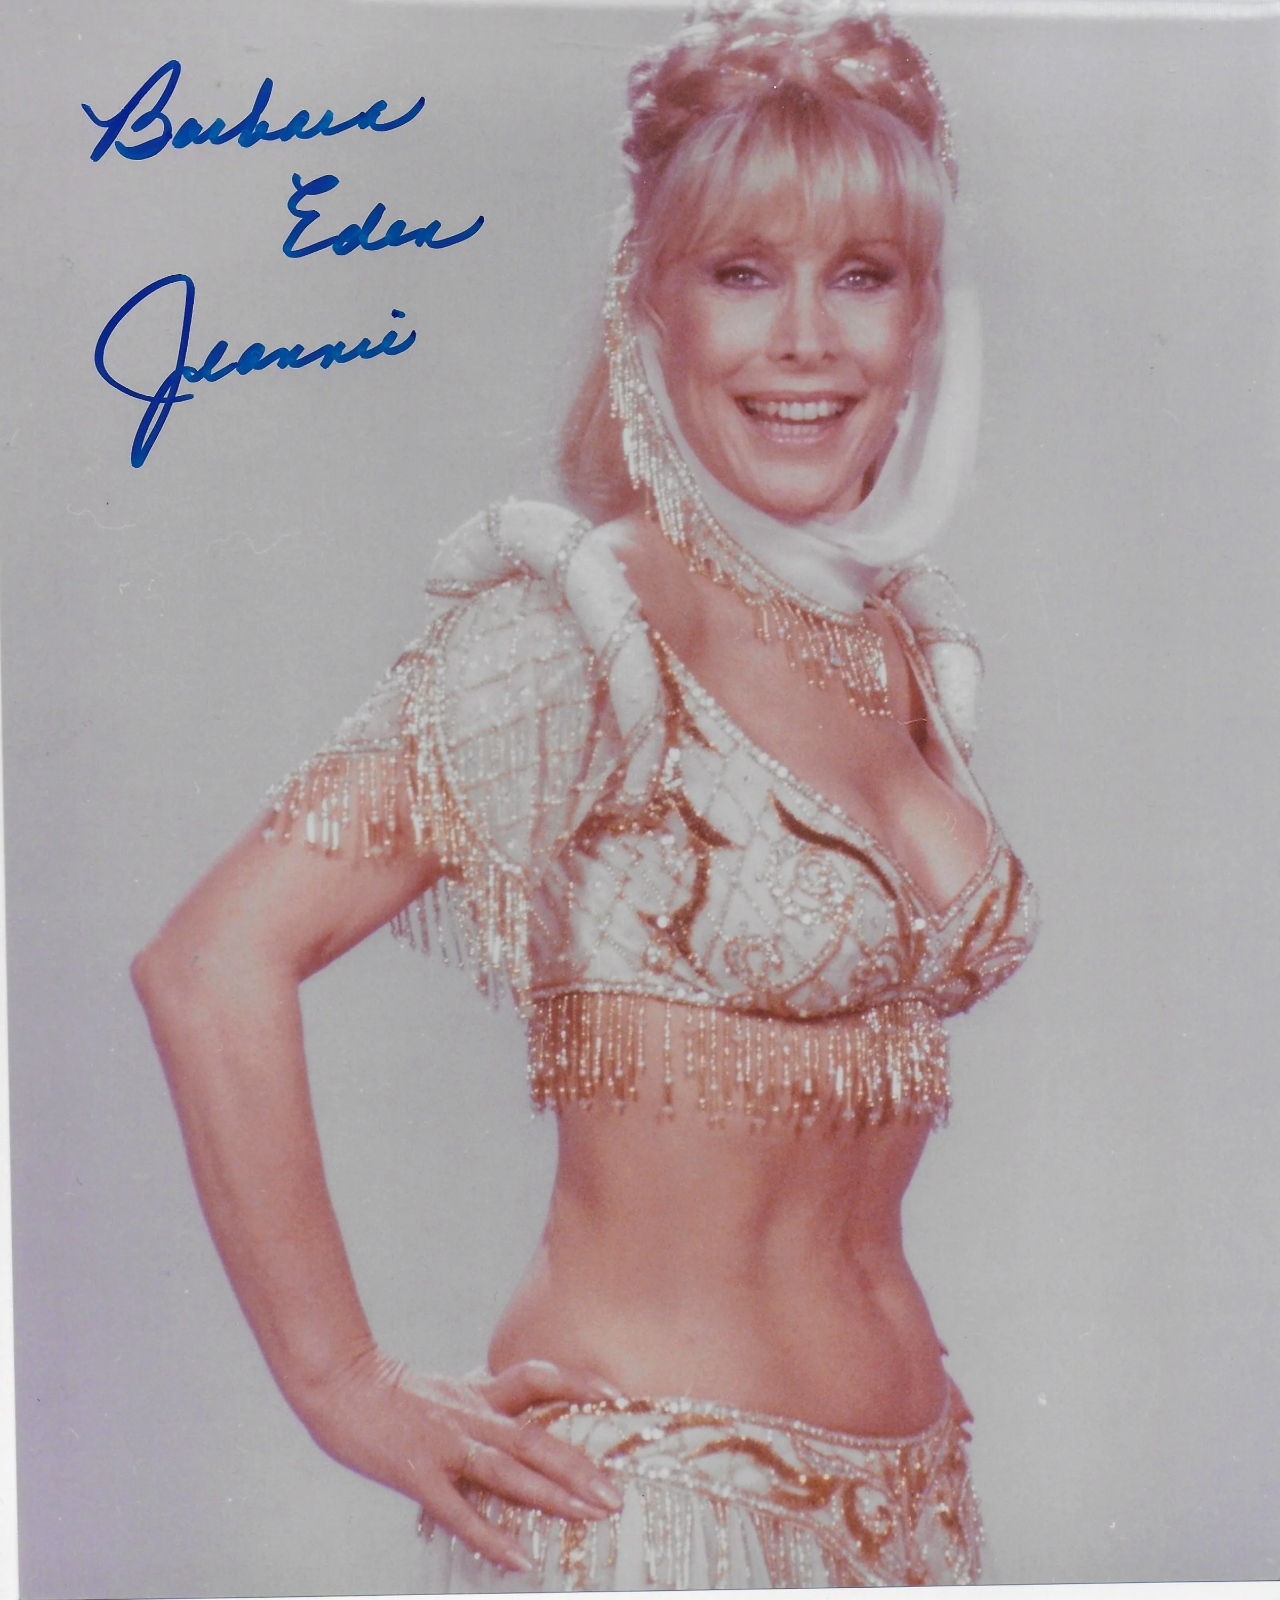 Barbara Eden I Dream of Jeannie 8x10 Photo Poster painting #72 signed at The Hollywood Show